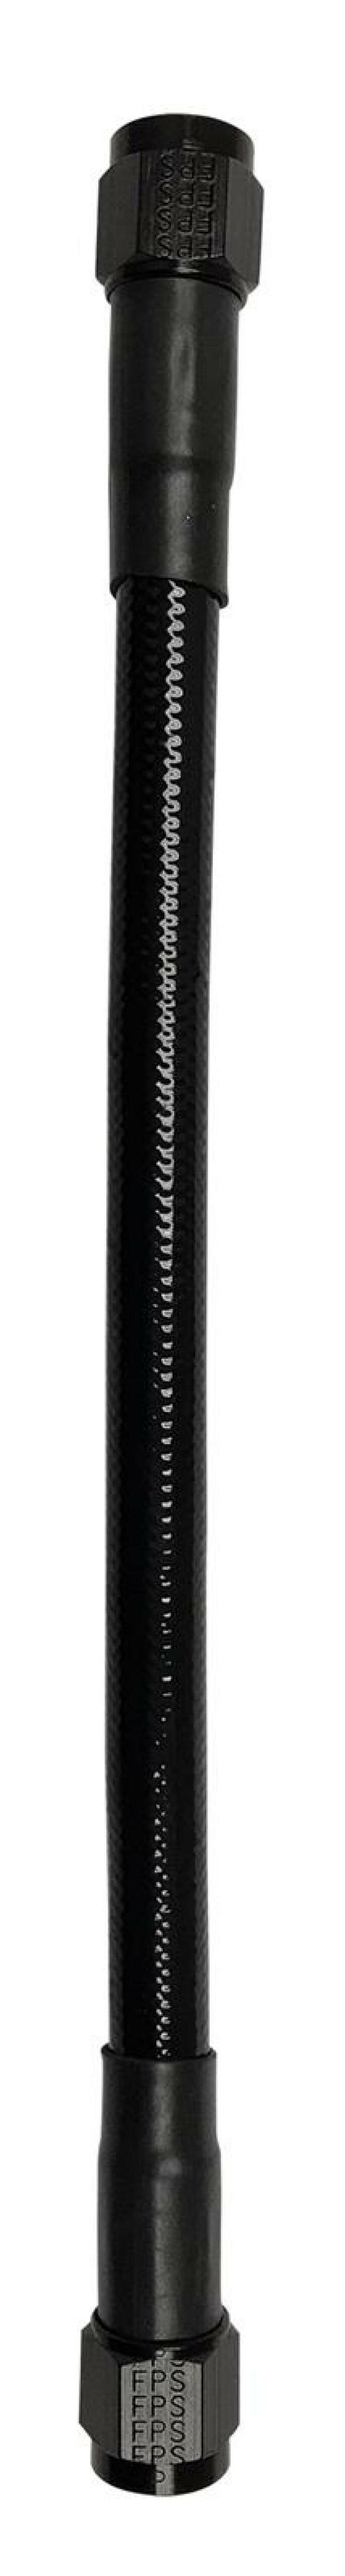 Fragola -10AN Ext Black PTFE Hose Assembly Straight x Straight 12in - 6029-1-1-12BL